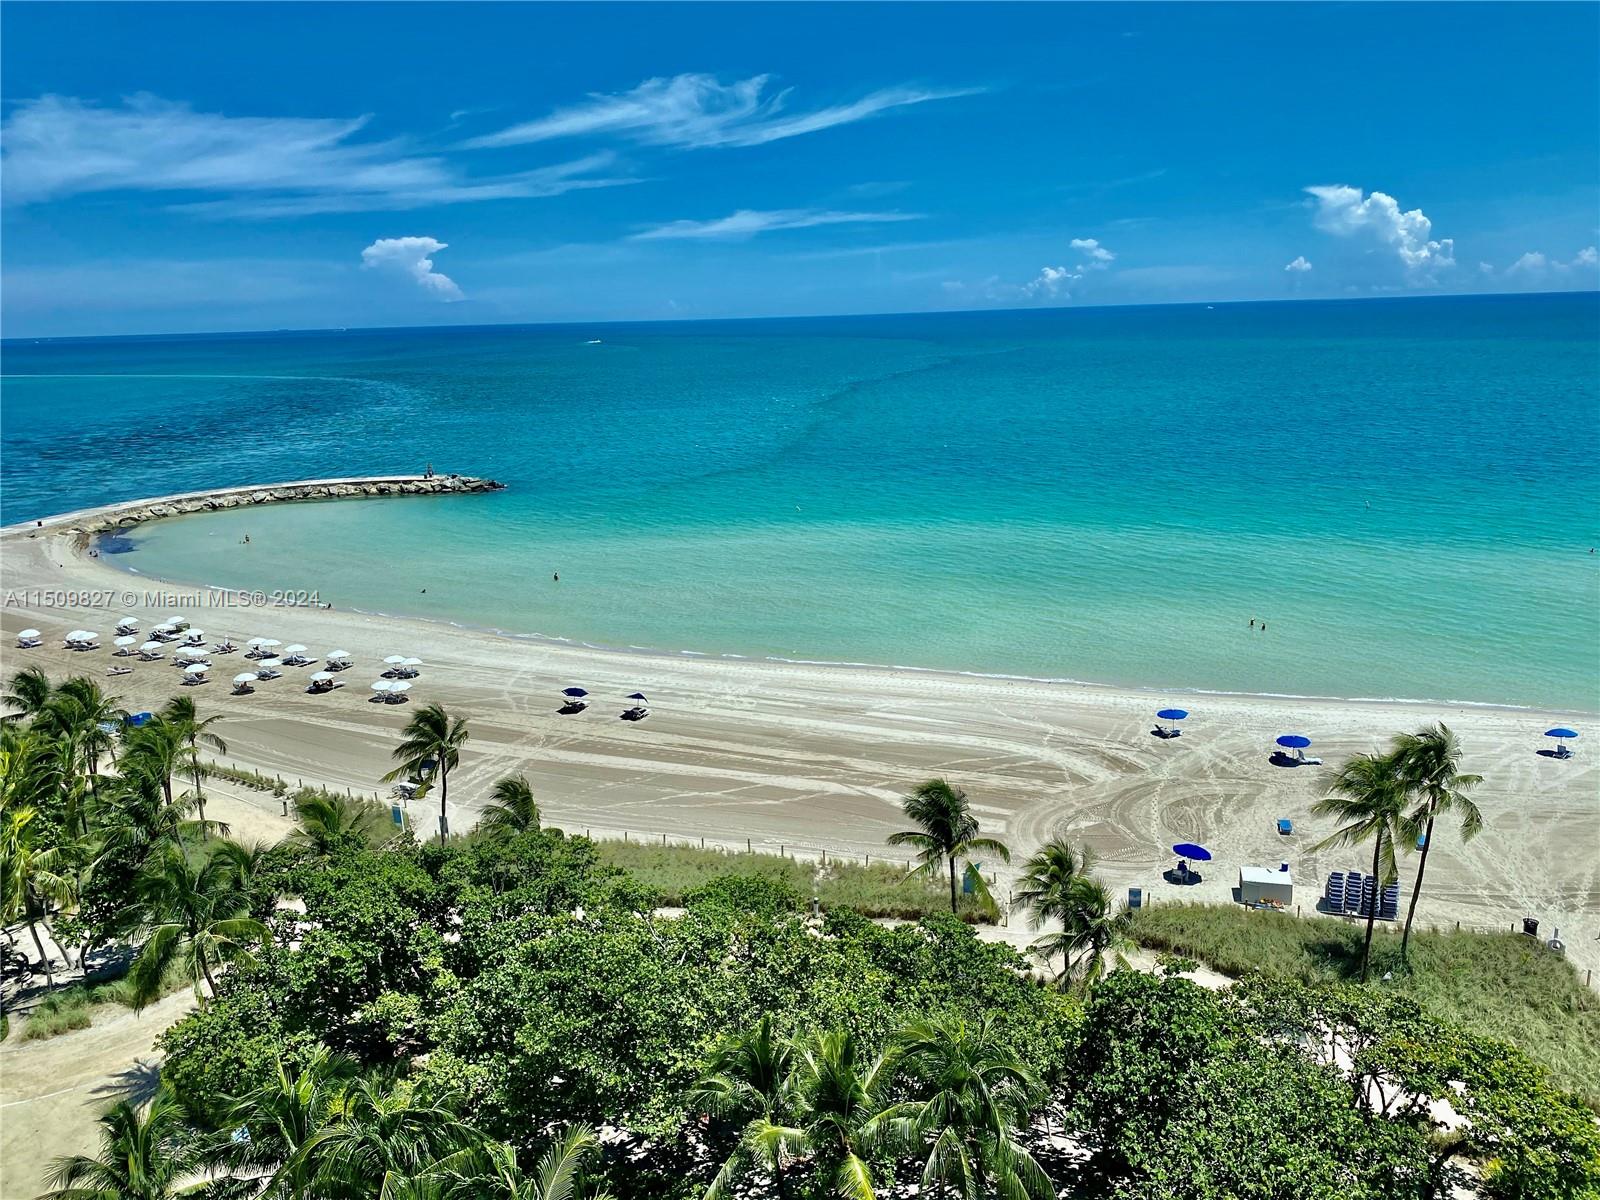 Bright freshly upgraded unit with direct ocean views. Ready to rent unfurnished for 12 months. Easy to show please call or text listing agent. The building has great amenities and the beach of Bal Harbour is super peaceful.